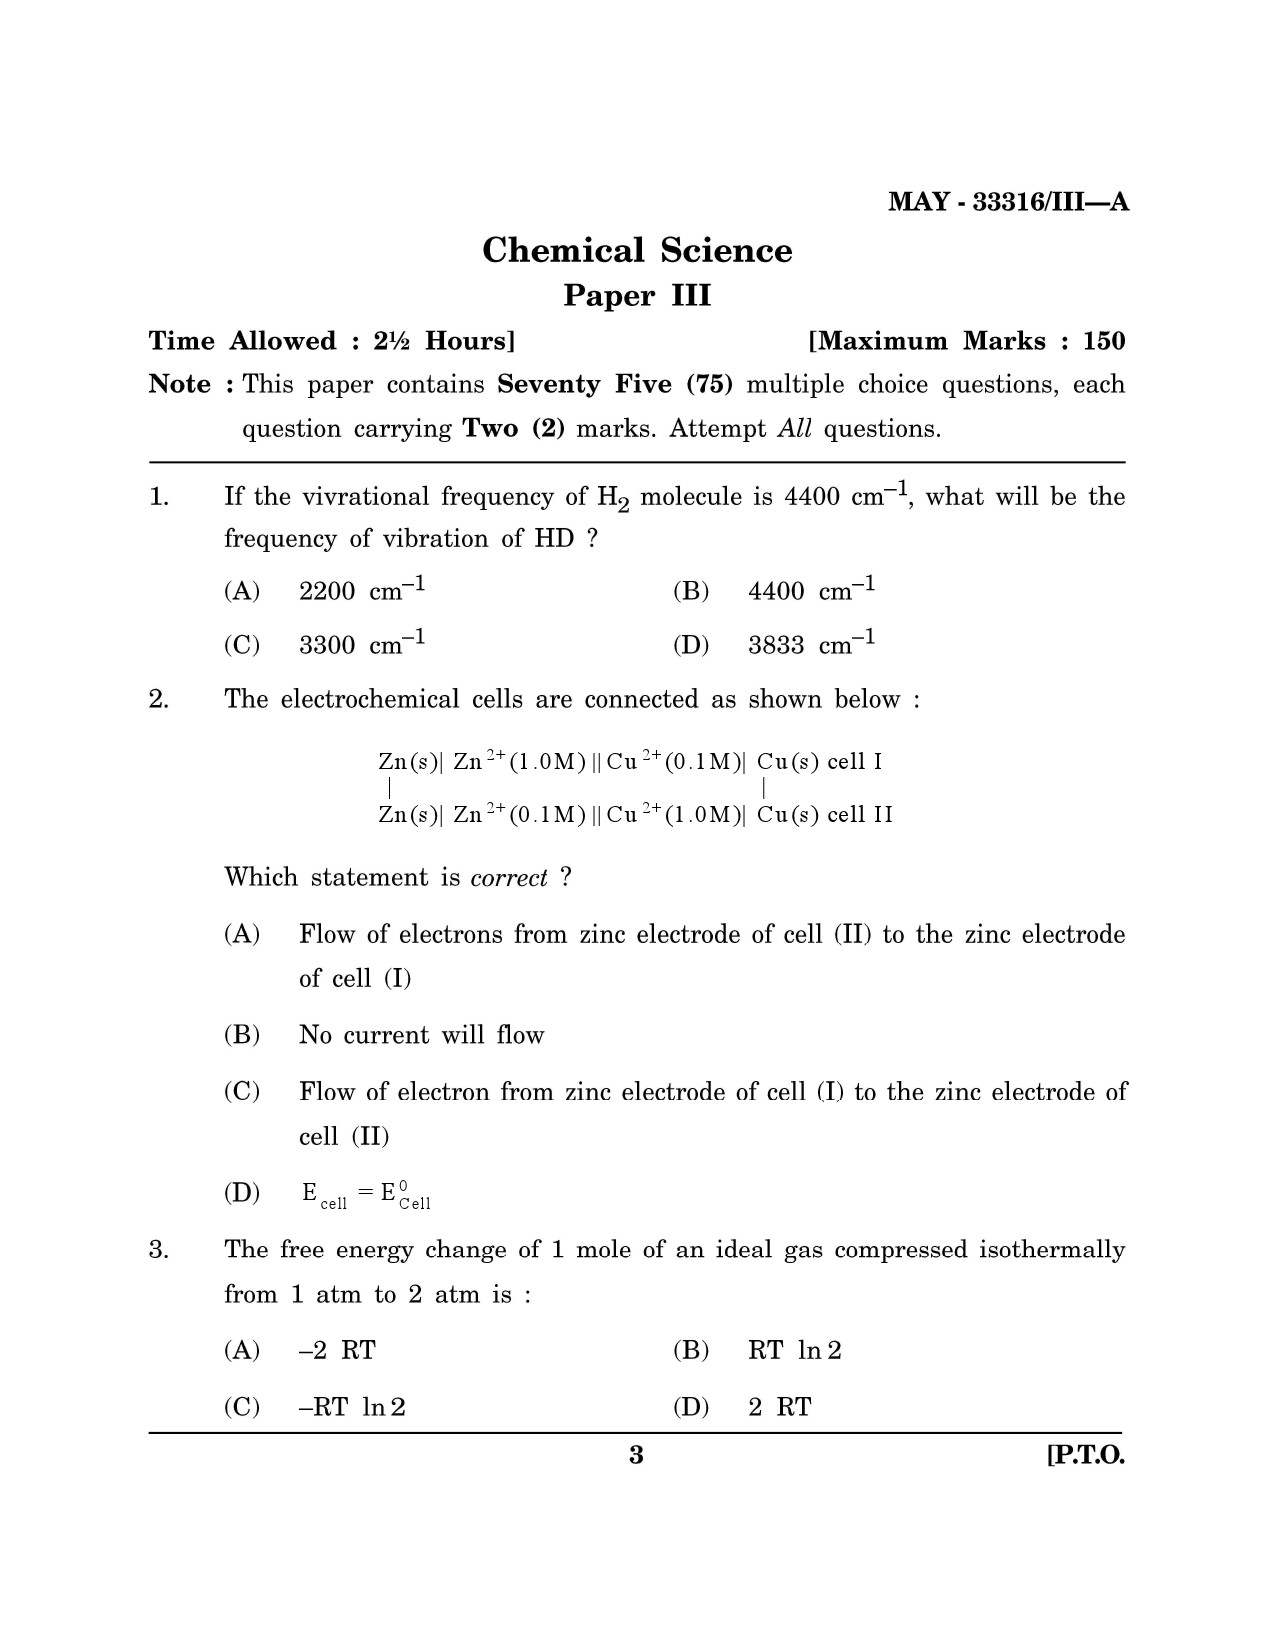 Maharashtra SET Chemical Sciences Question Paper III May 2016 2